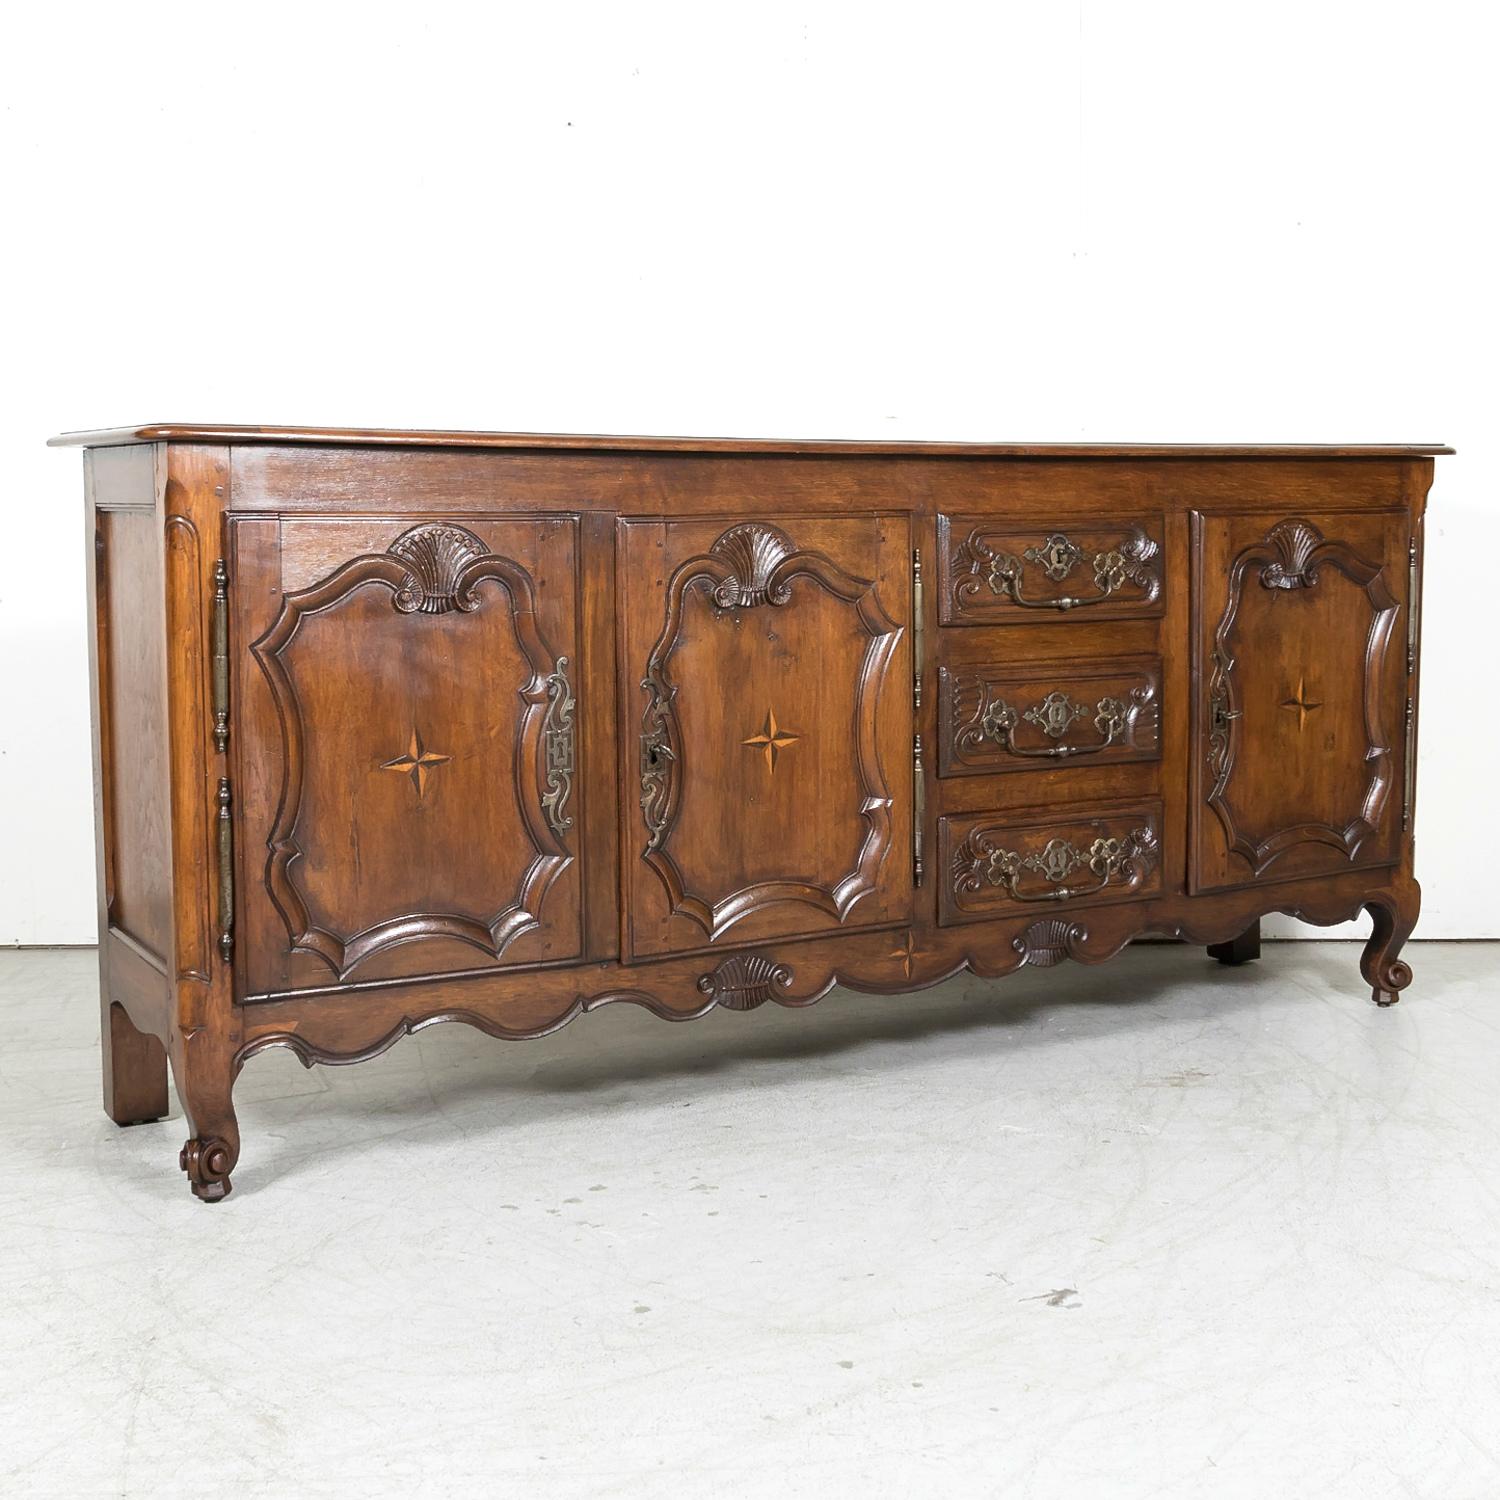 A mid-19th century French Country Louis XV style enfilade buffet handcrafted of solid oak by talented artisans near Vannes, a fortified medieval town in the Brittany region of northwest France, circa 1850s. Having a molded edge rectangular plank top